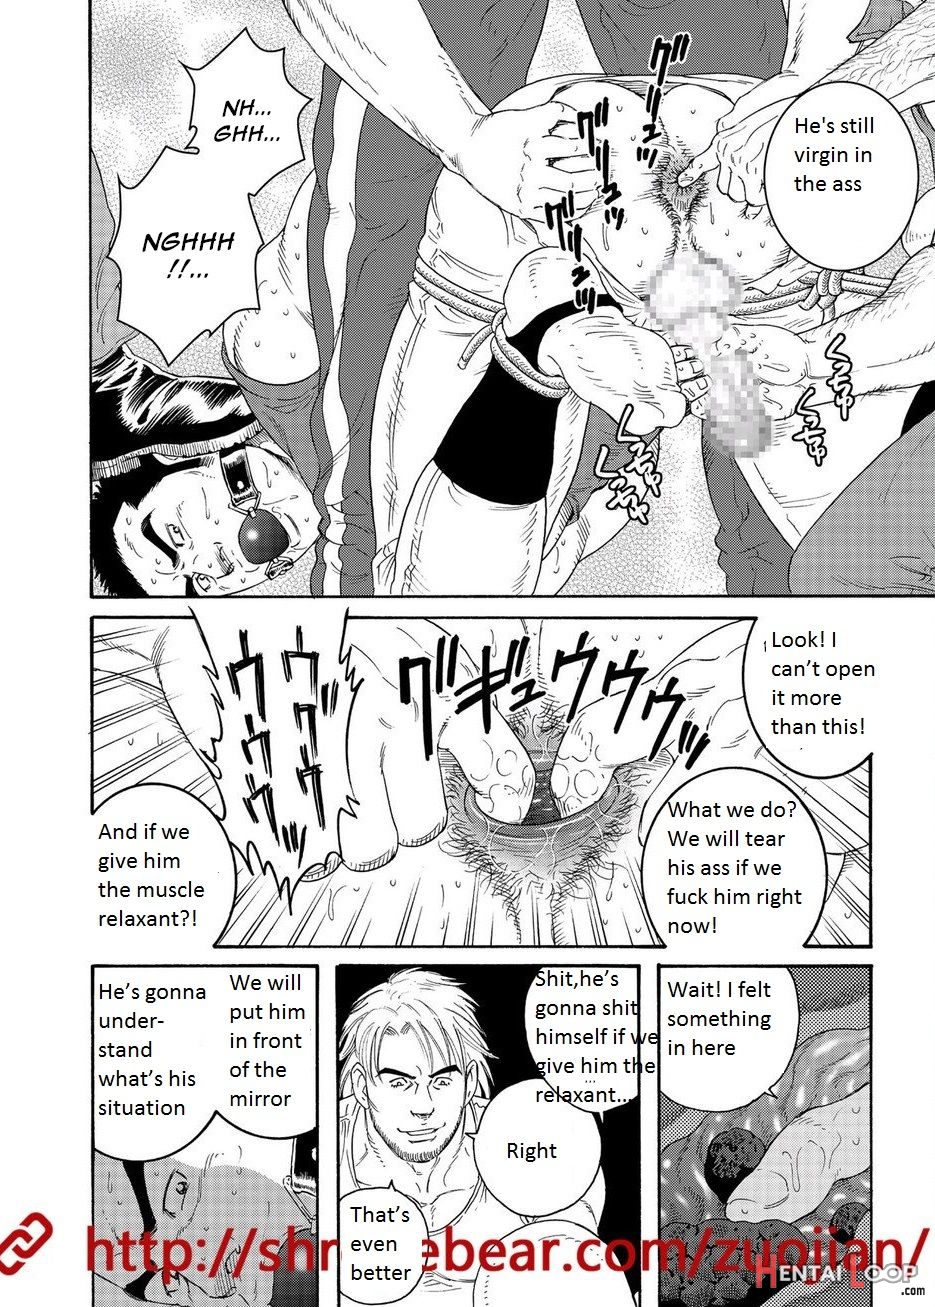 Gengoroh Tagame - Slave Training Summer Camp Eng page 8